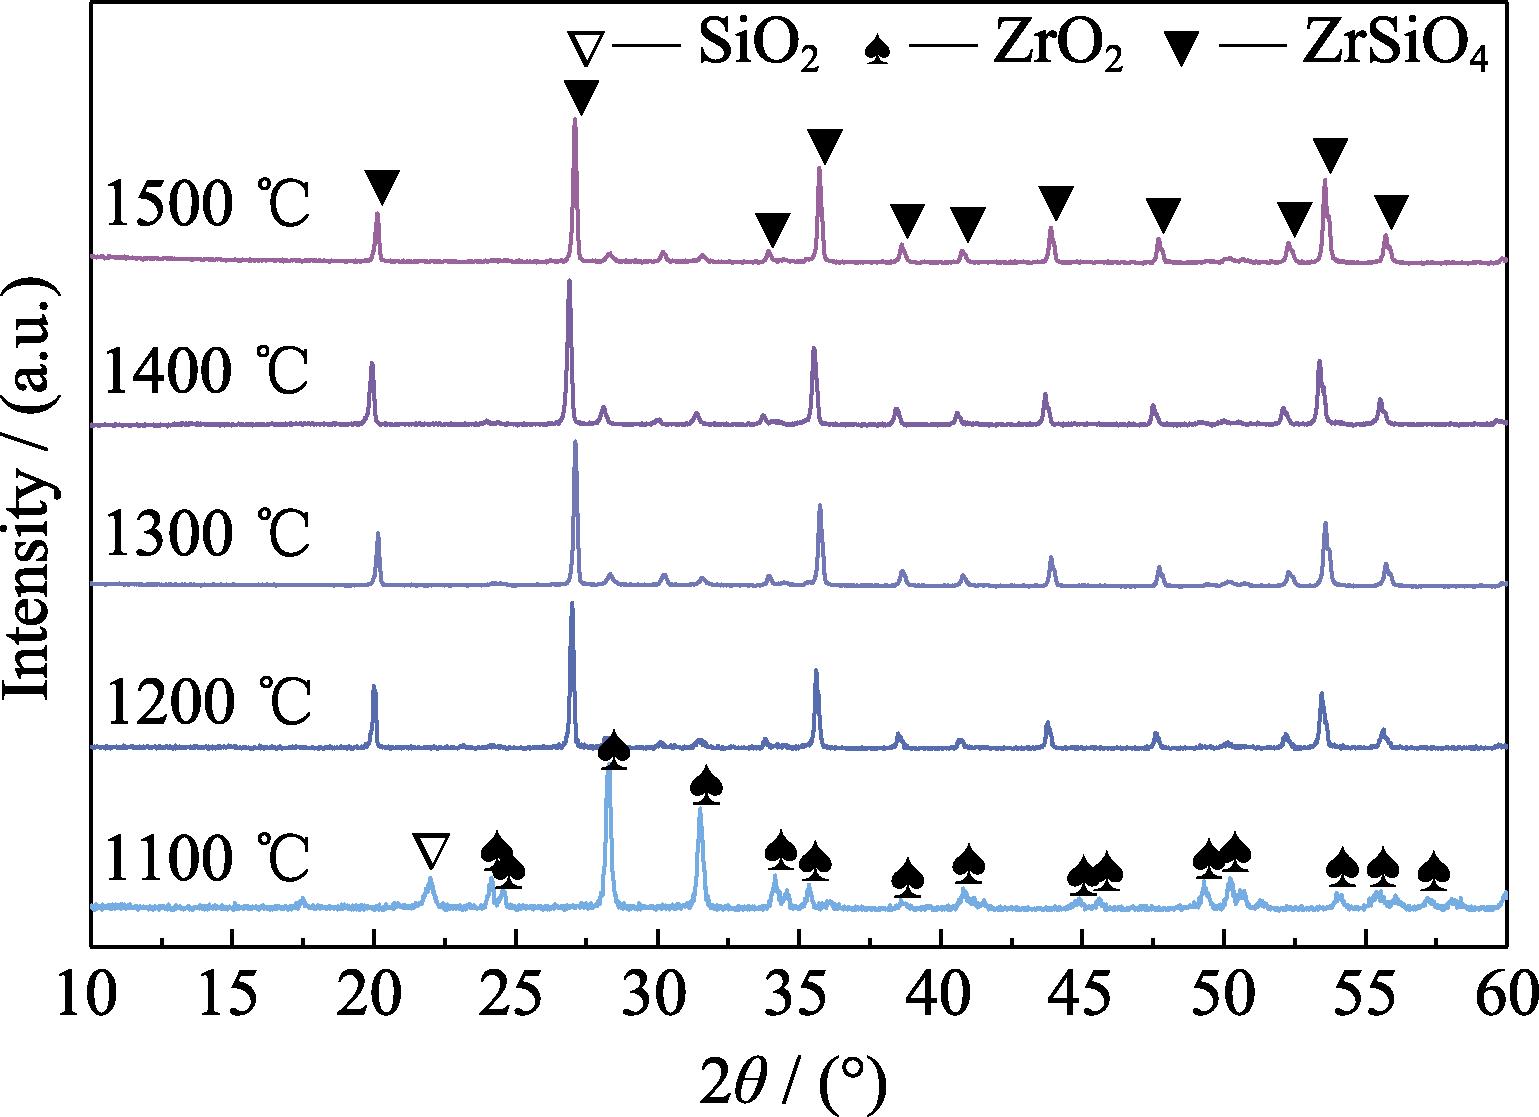 XRD patterns of ZrSiO4 synthesized by MSS at different temperatures (1100, 1200, 1300, 1400, and 1500 ℃)